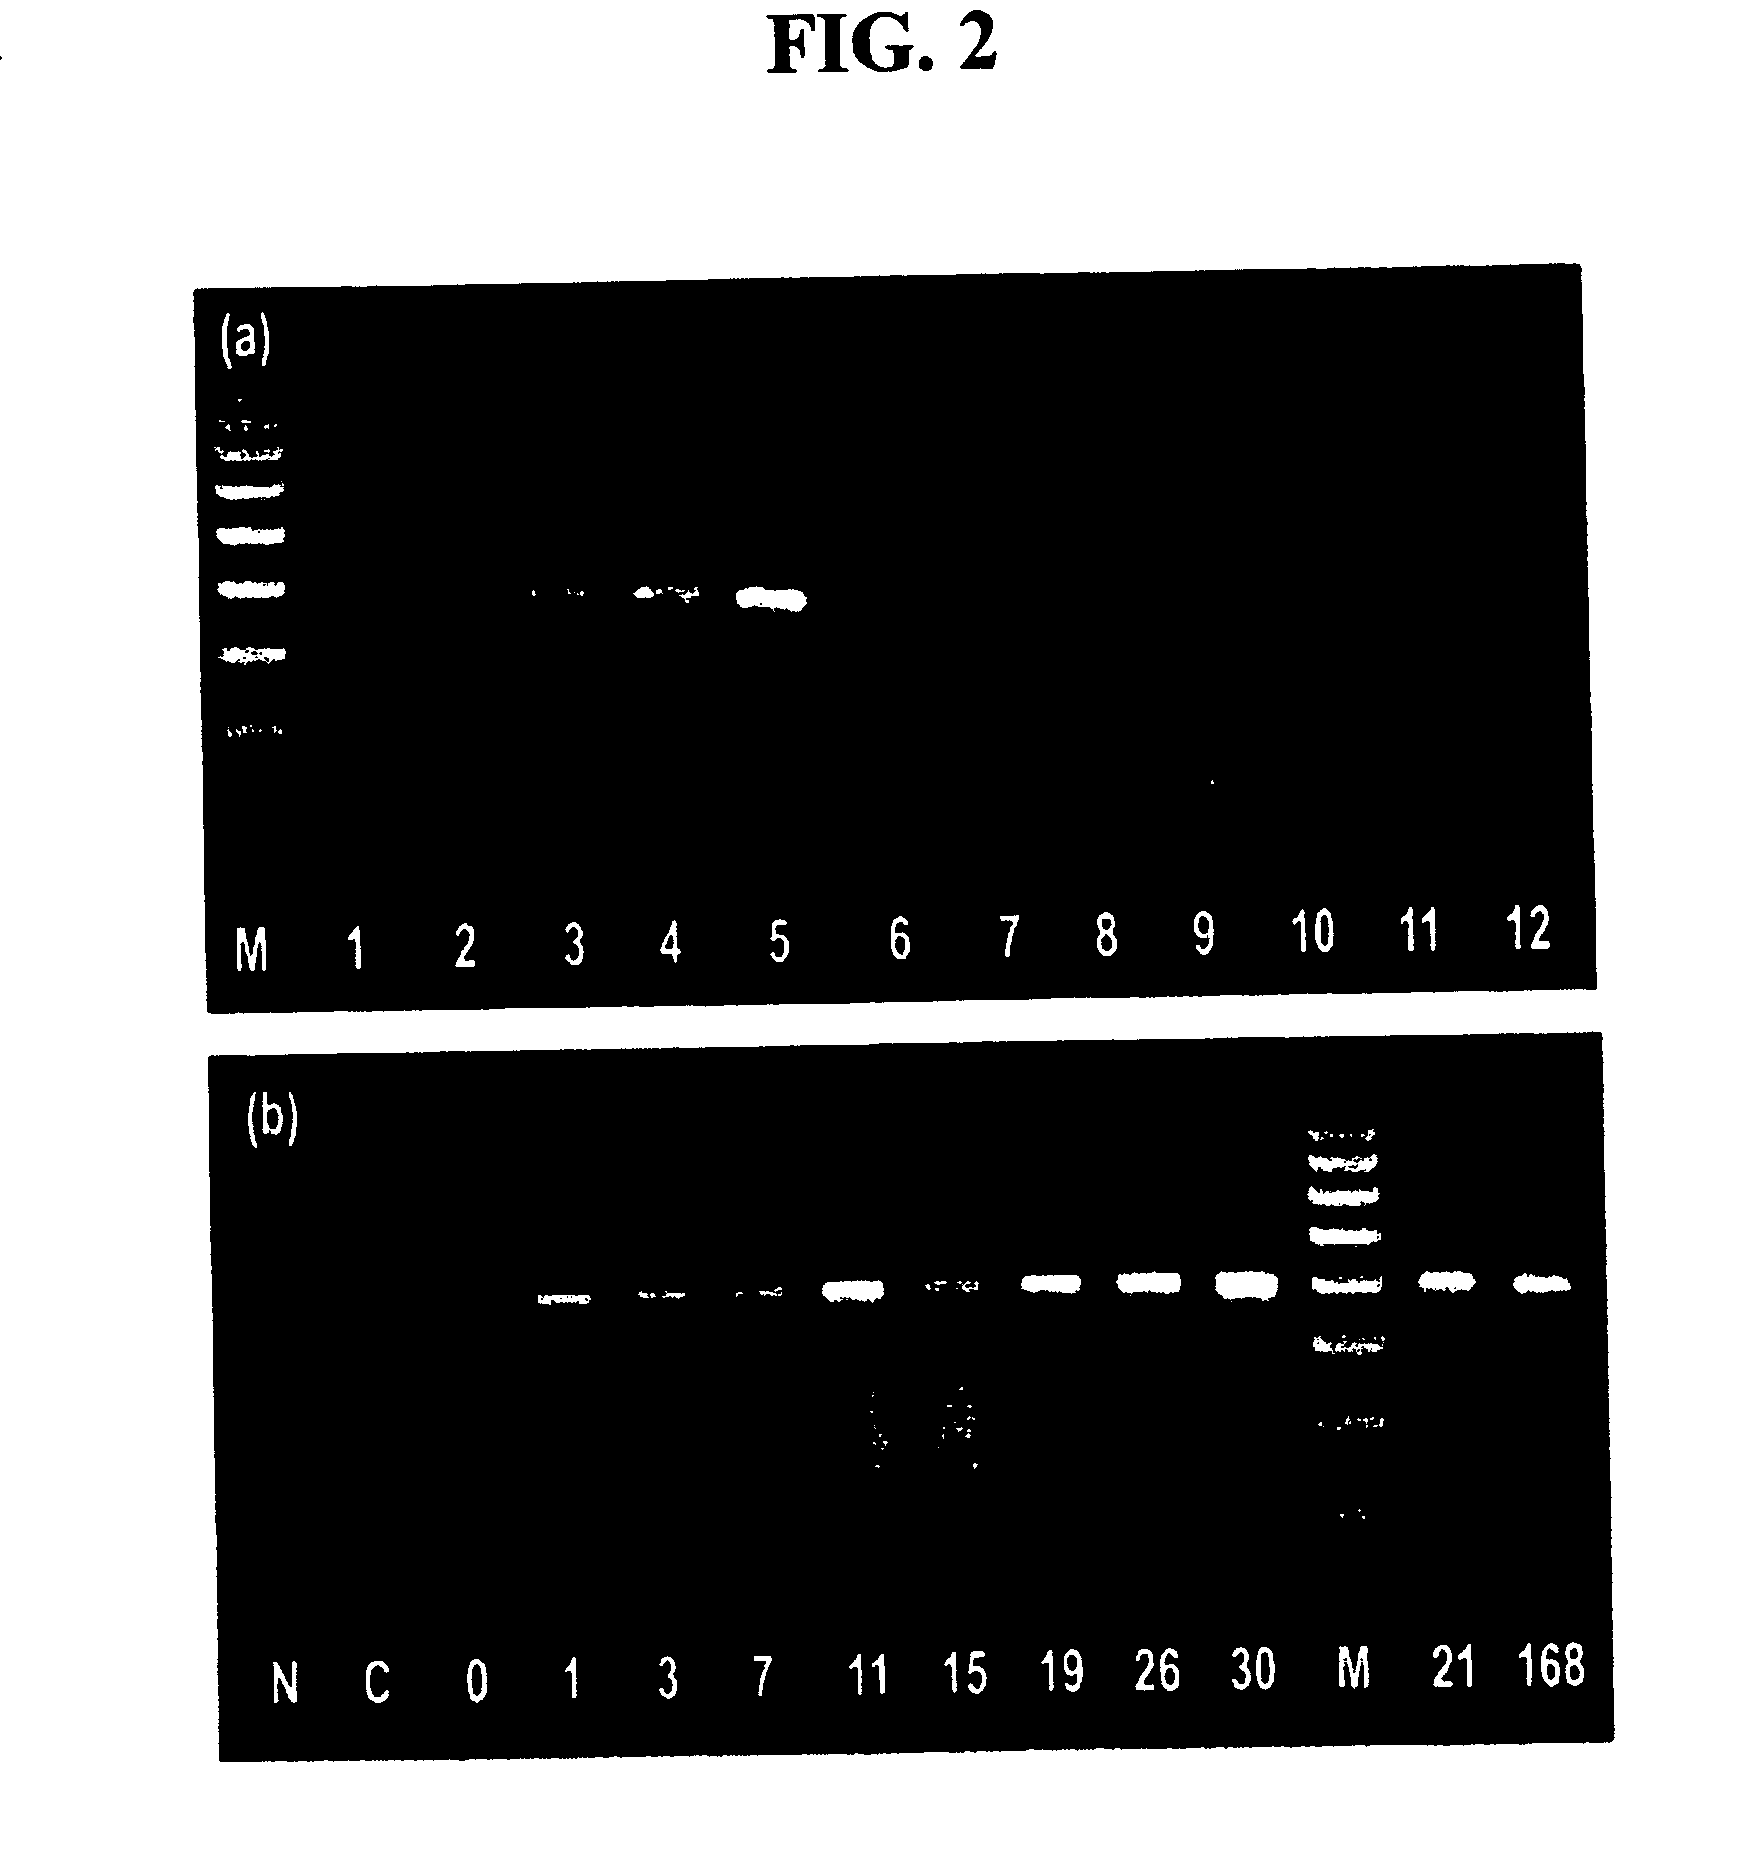 Recombinant peptide vector comprising the gene for treatment for autoimmune diseases